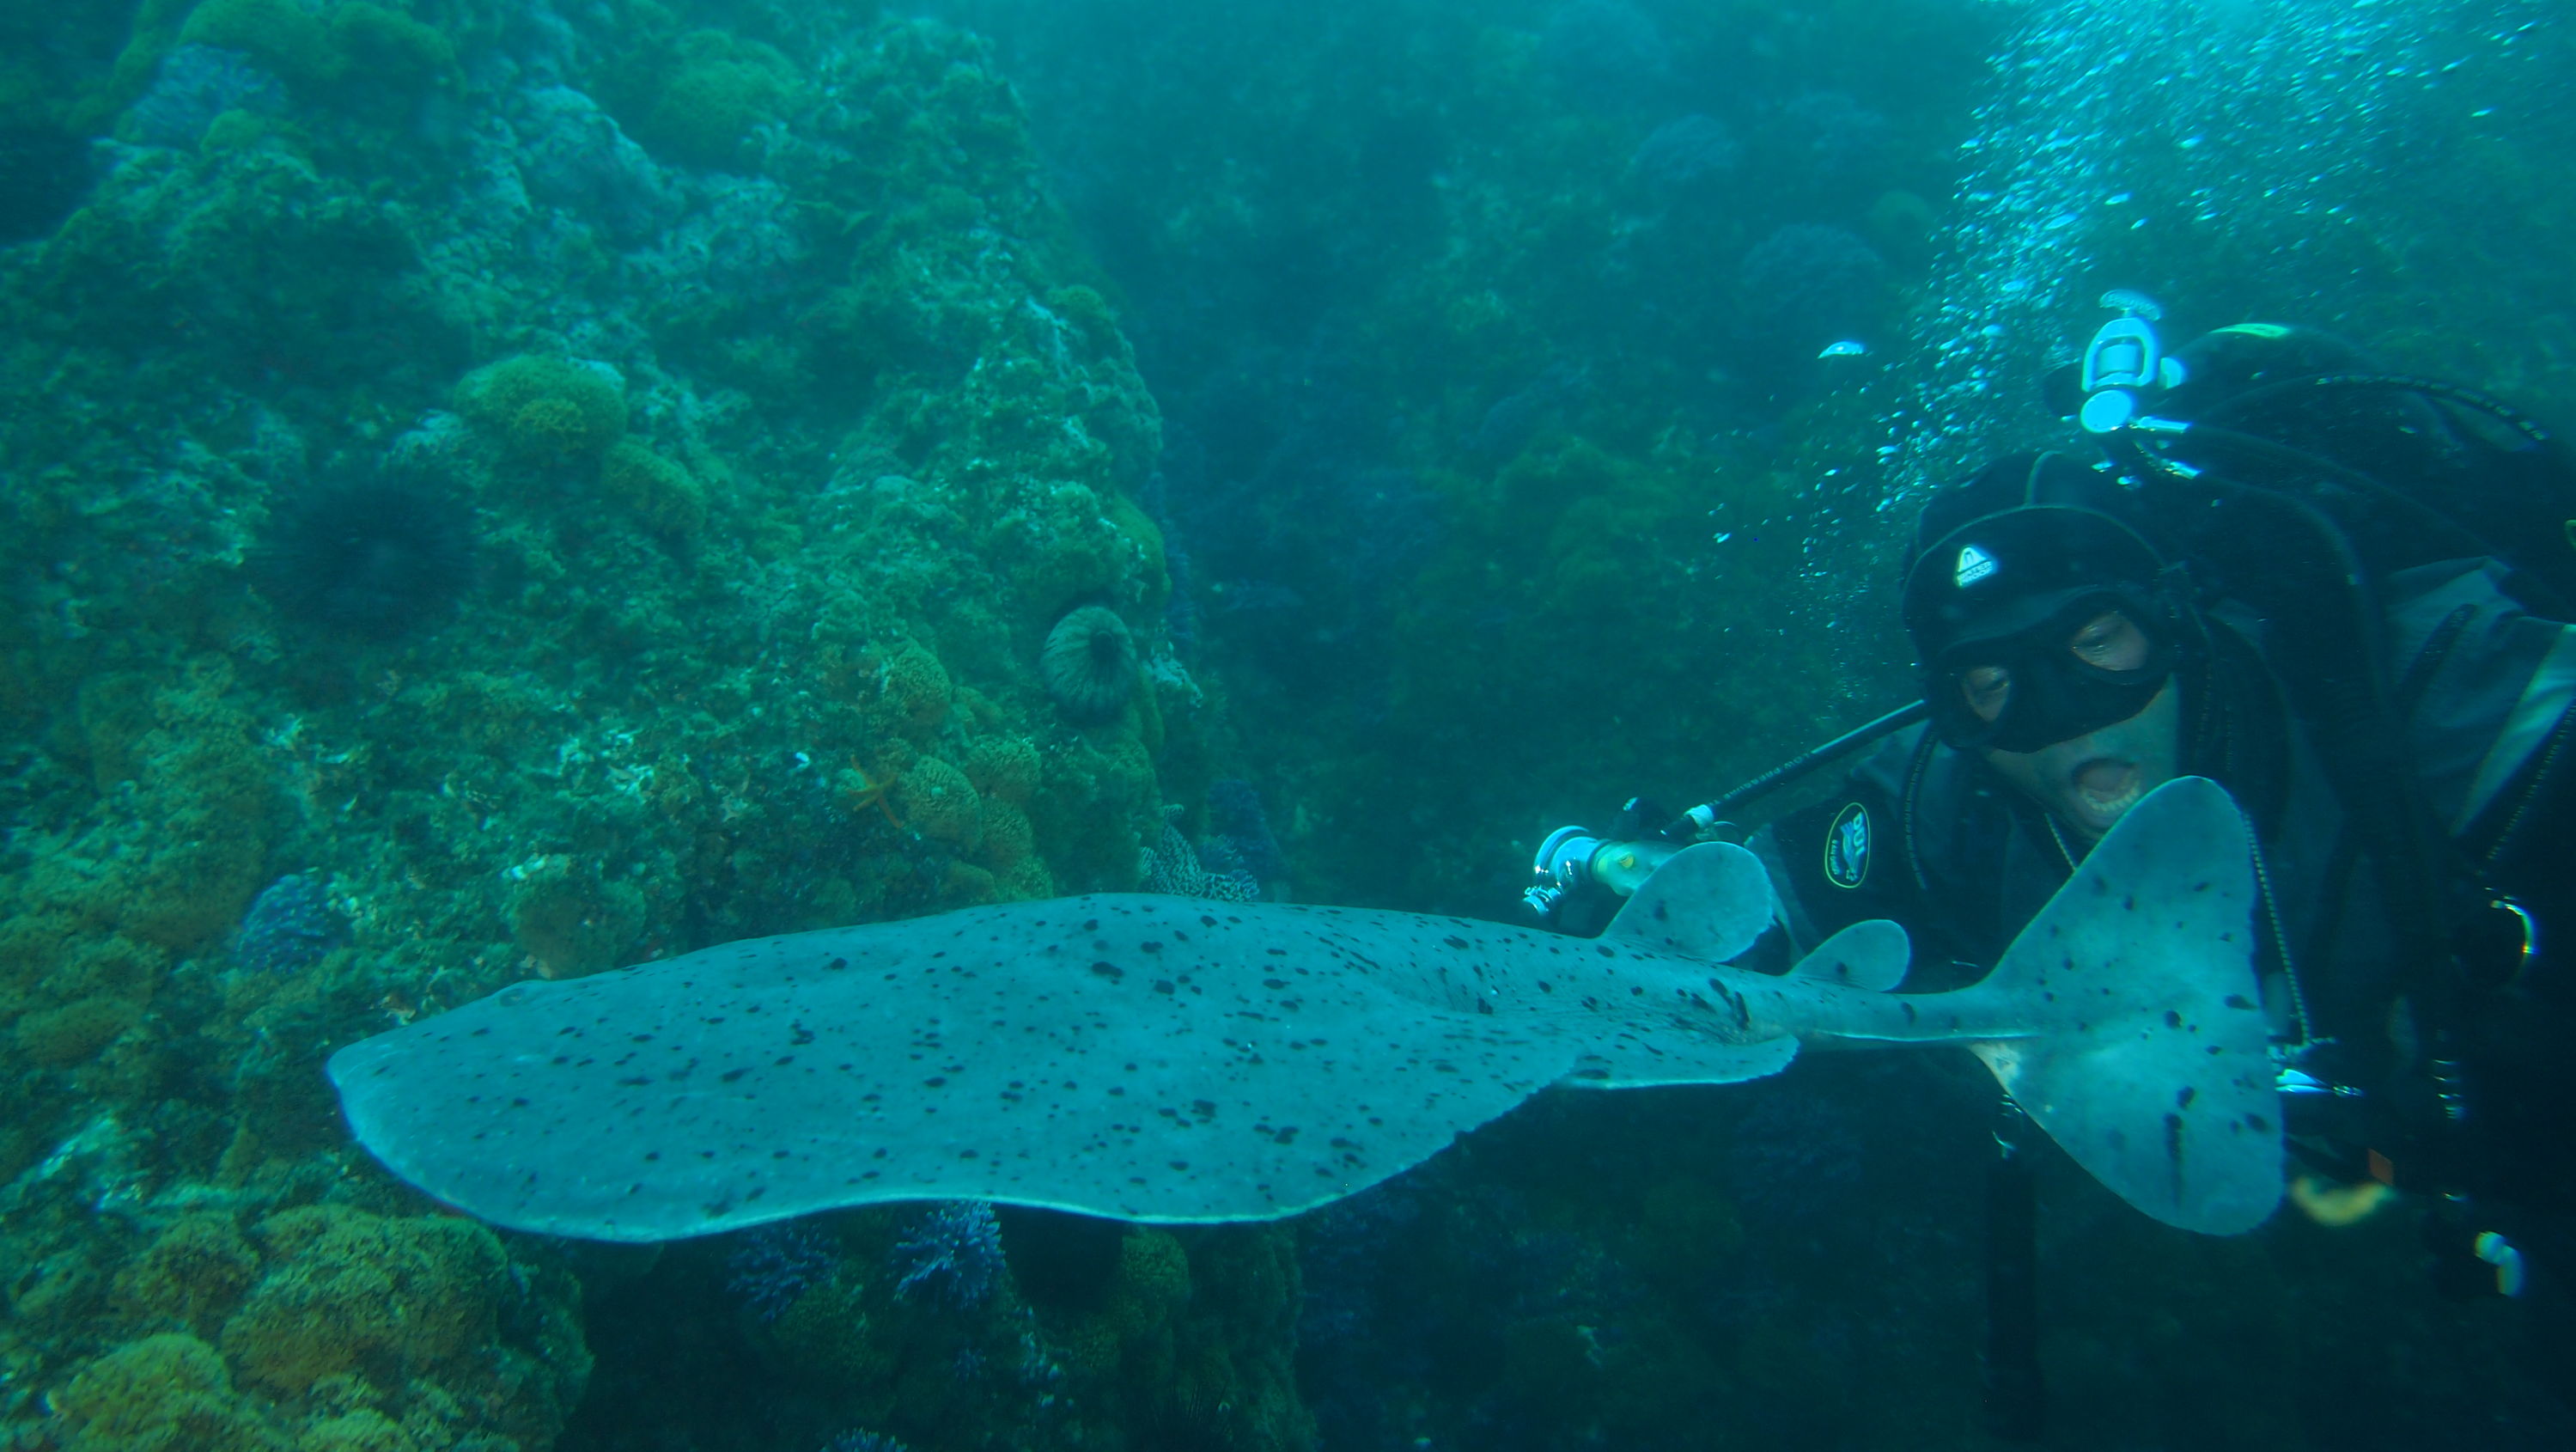 Paul "taking a bite" out of an electric ray!